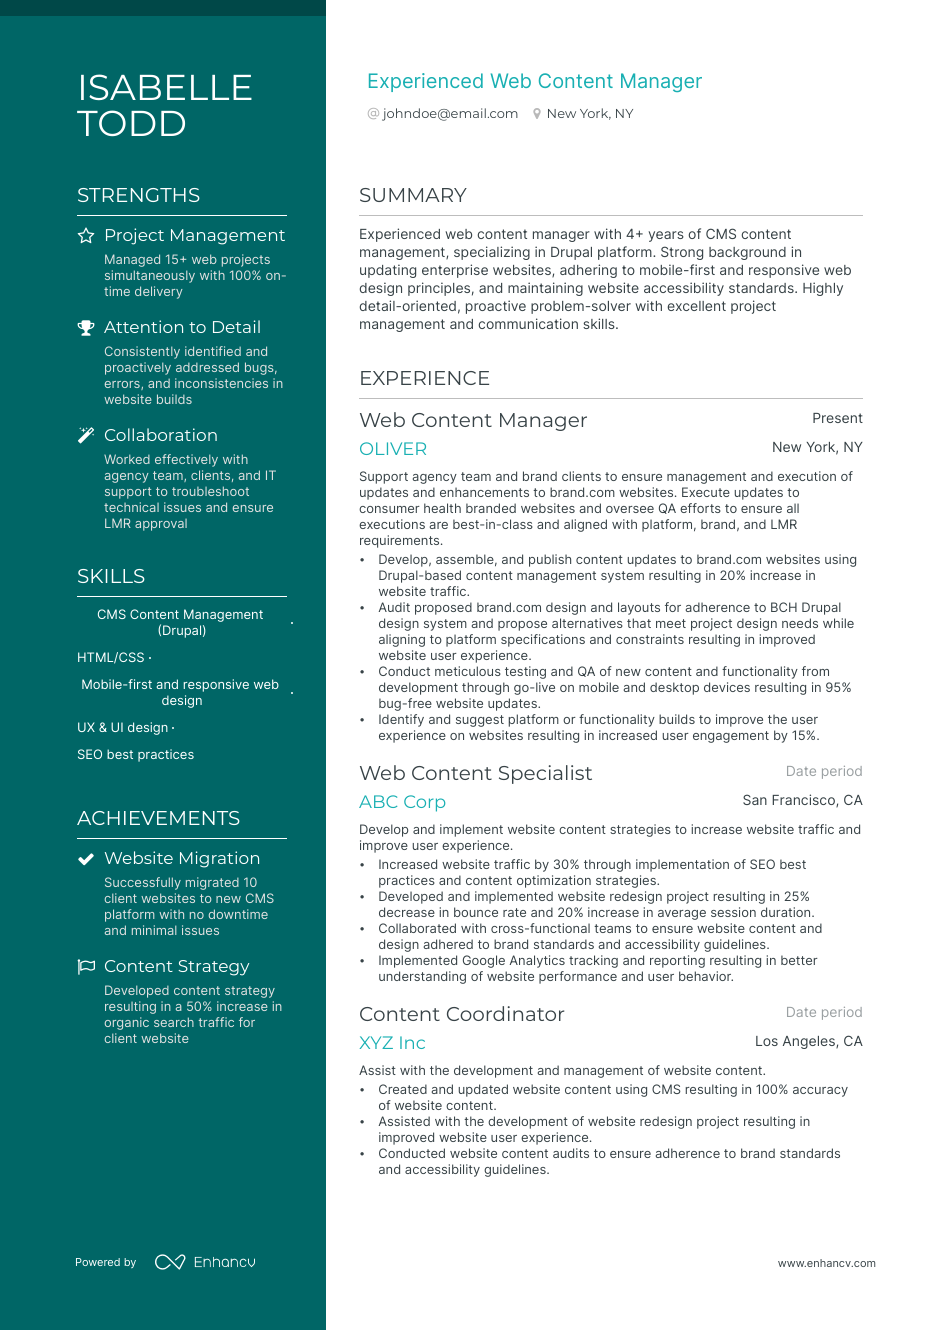 Web Content Manager resume example